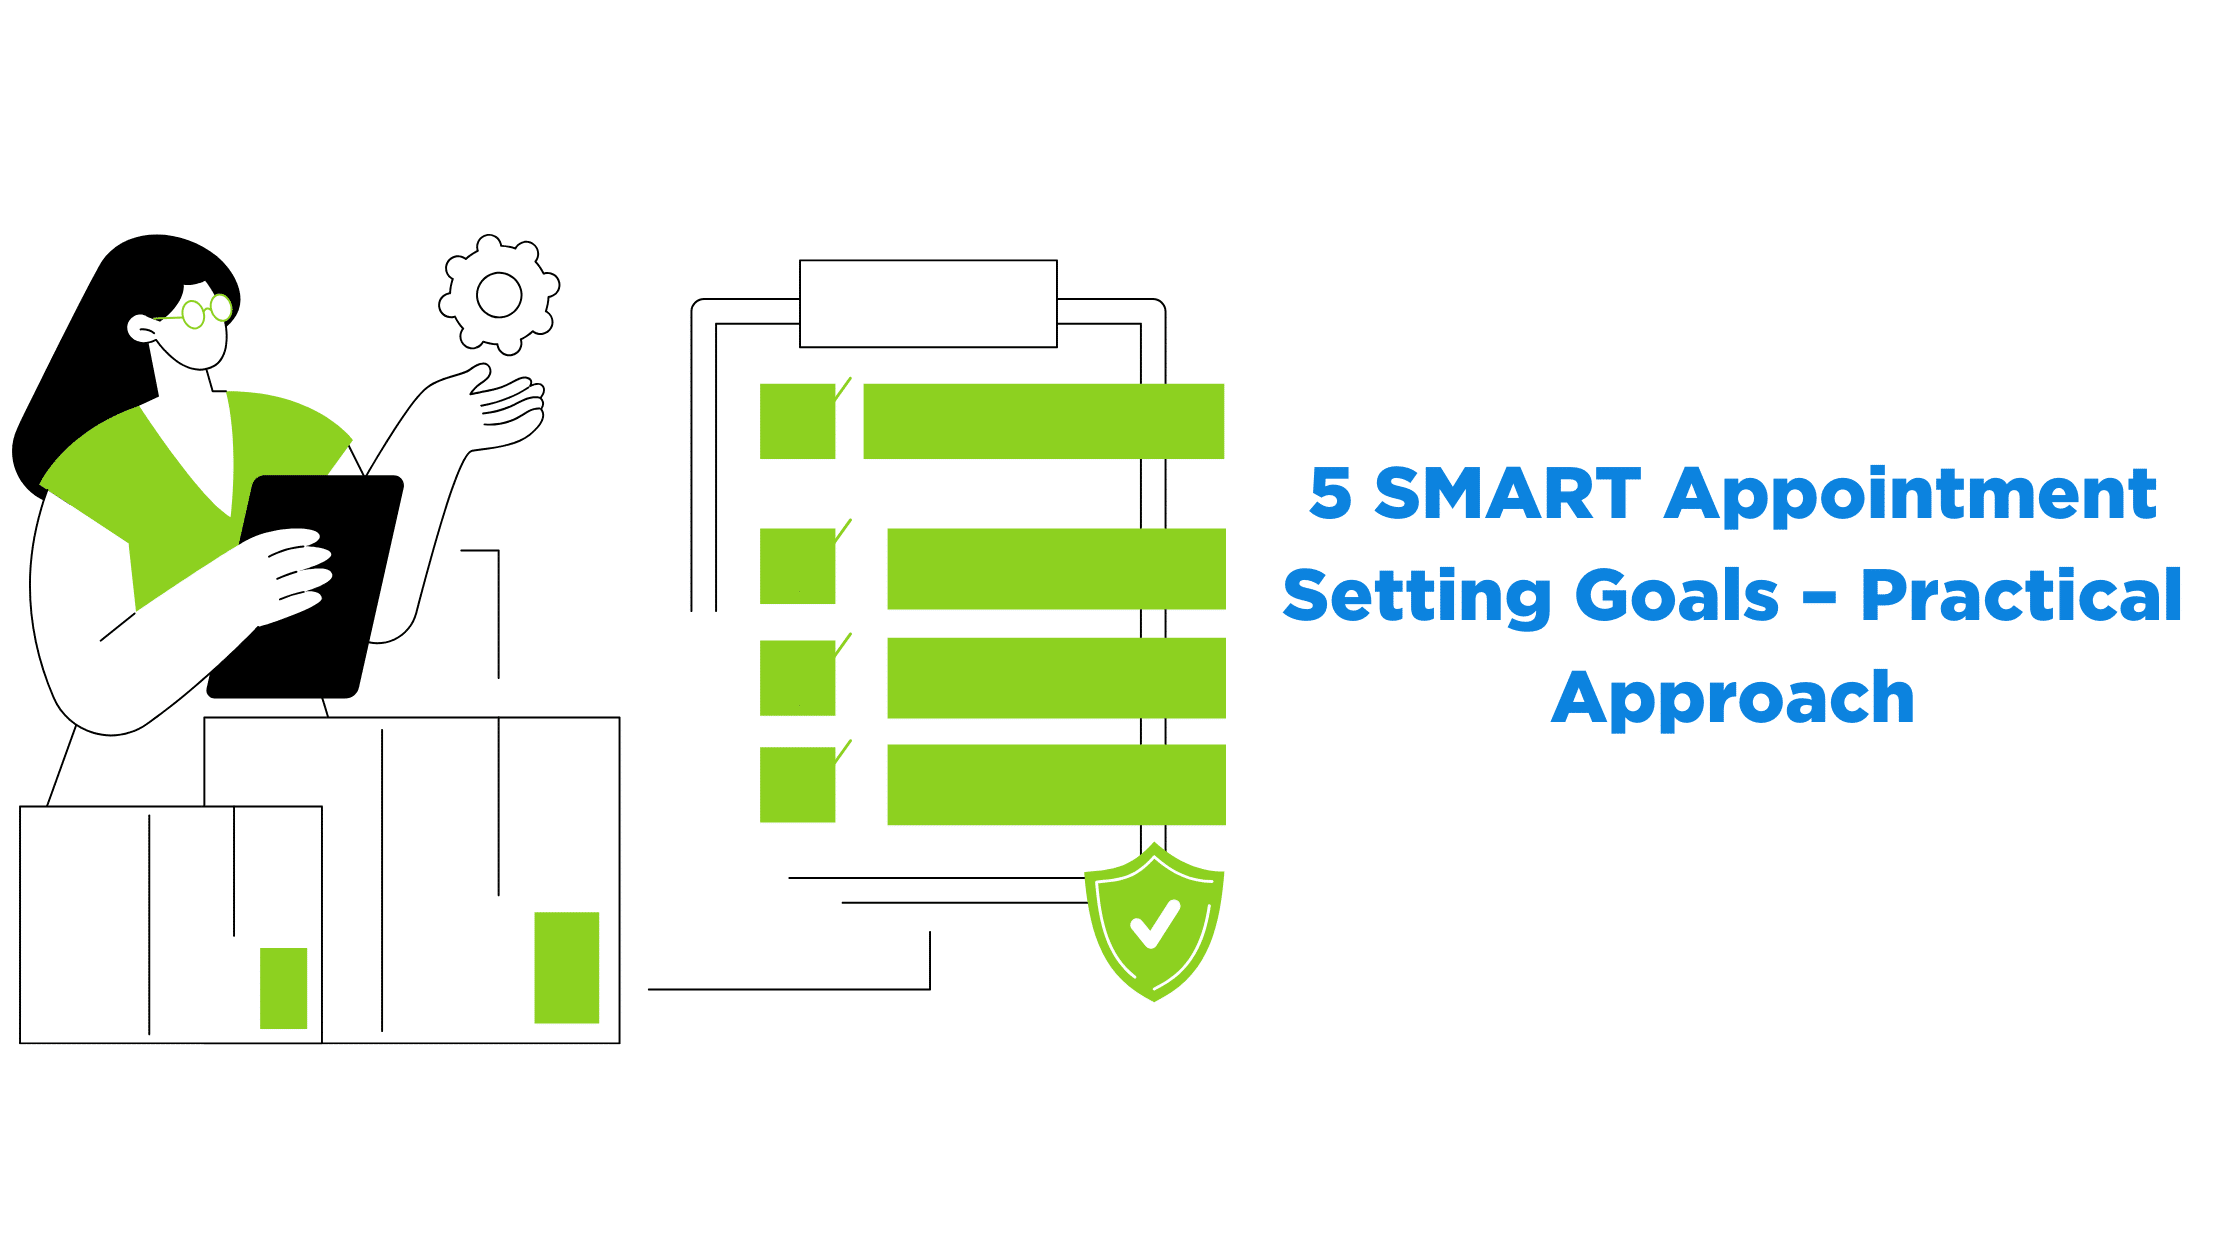 5 SMART Appointment Setting Goals – Practical Approach